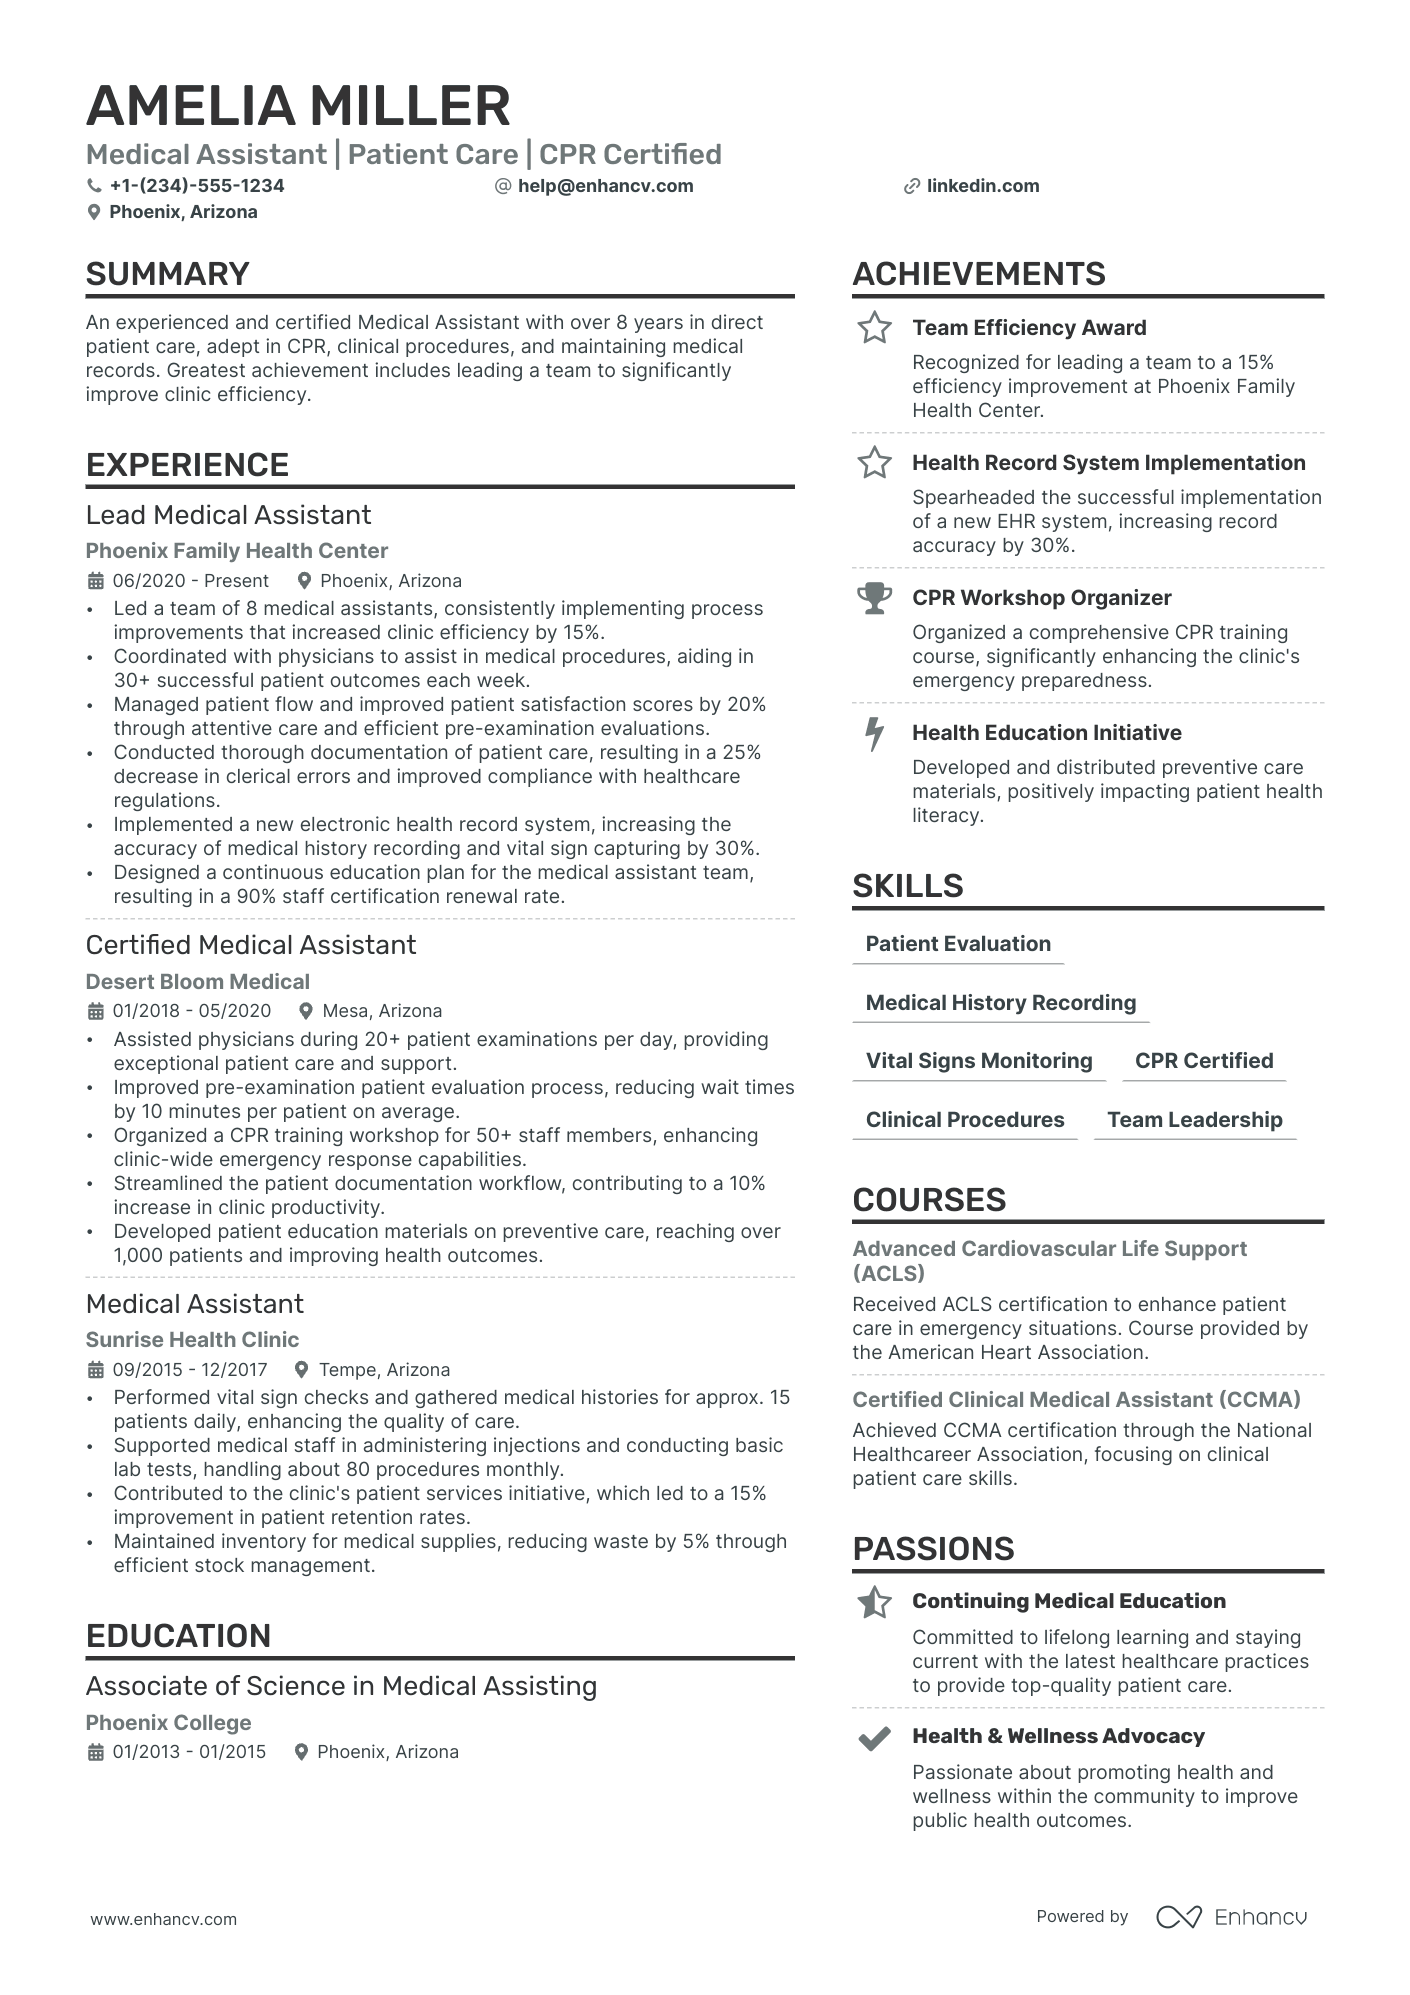 Clinical Medical Assistant resume example